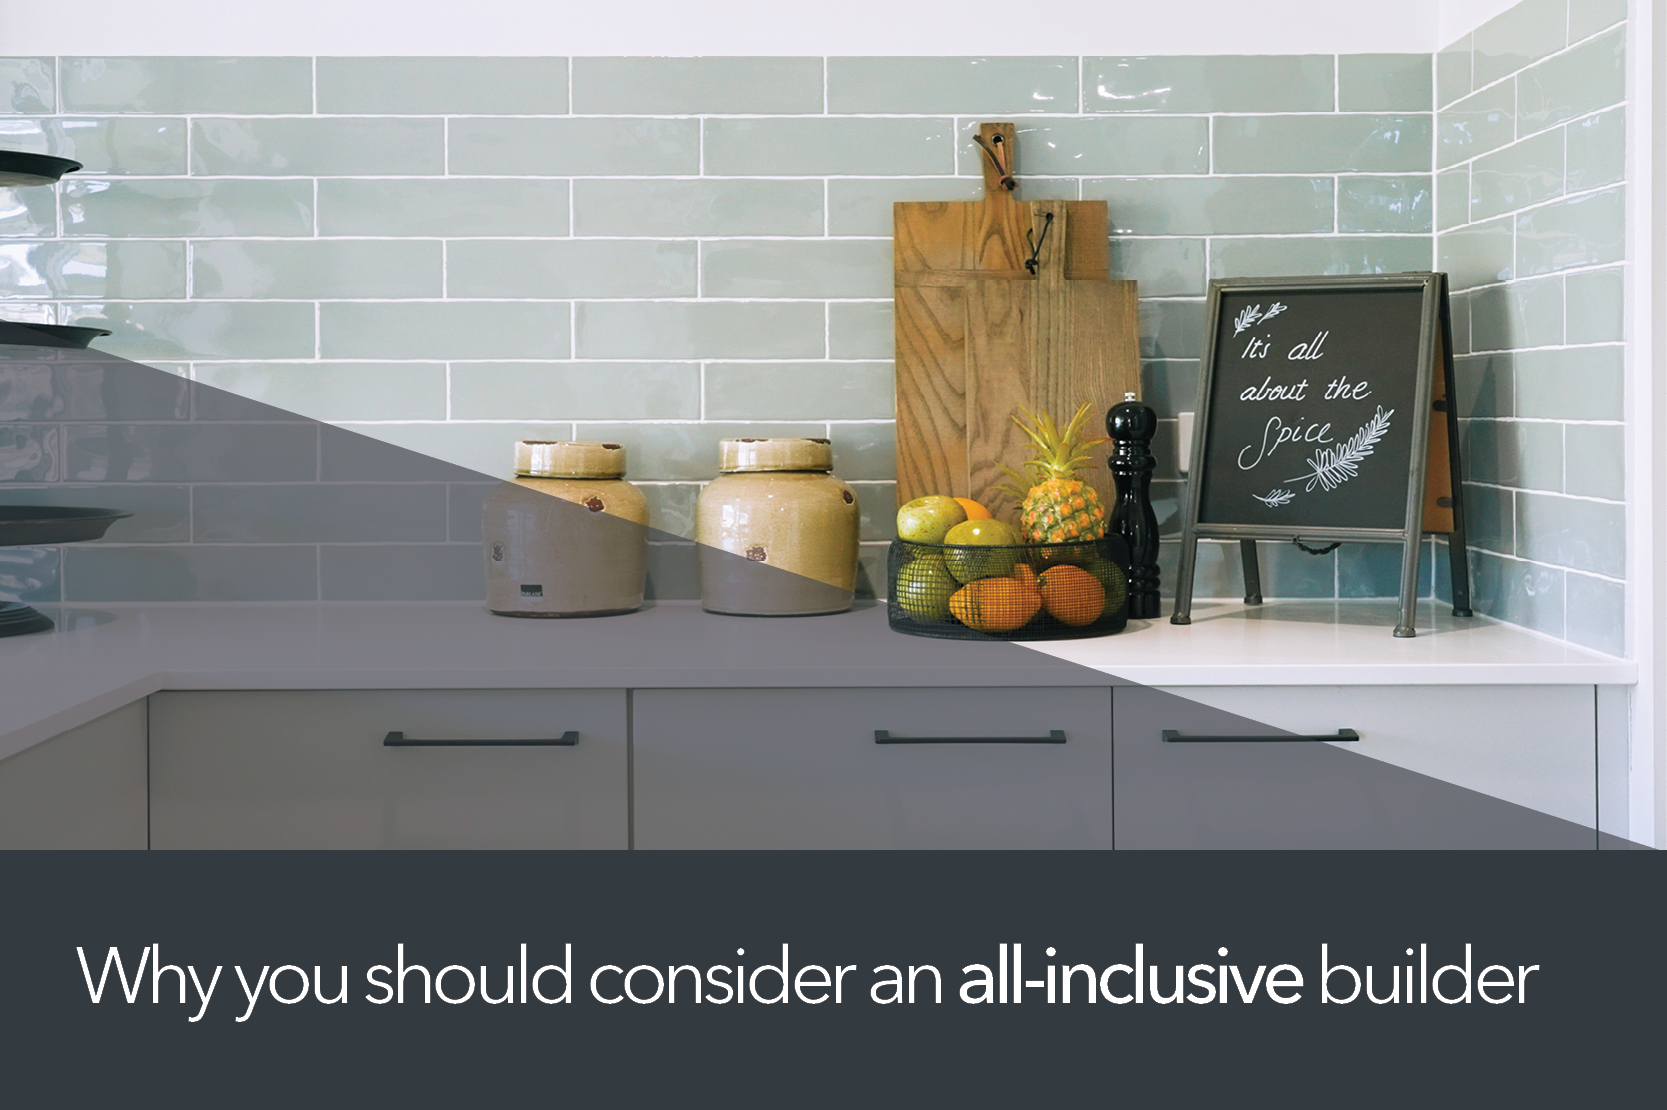 Why you should consider an all-inclusive builder